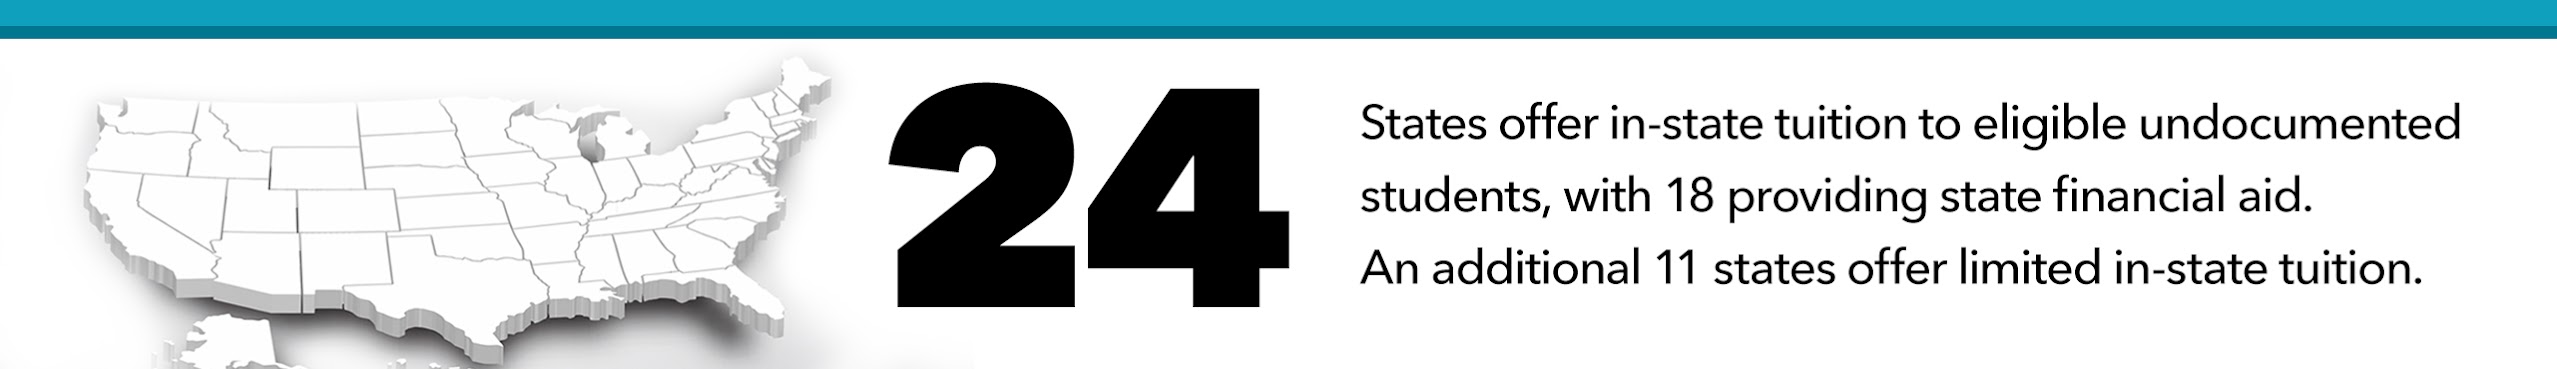 24 states offer in-state tuition to eligible undocumented students. 18 provide state financial aid and 11 with limited in-state tuition.